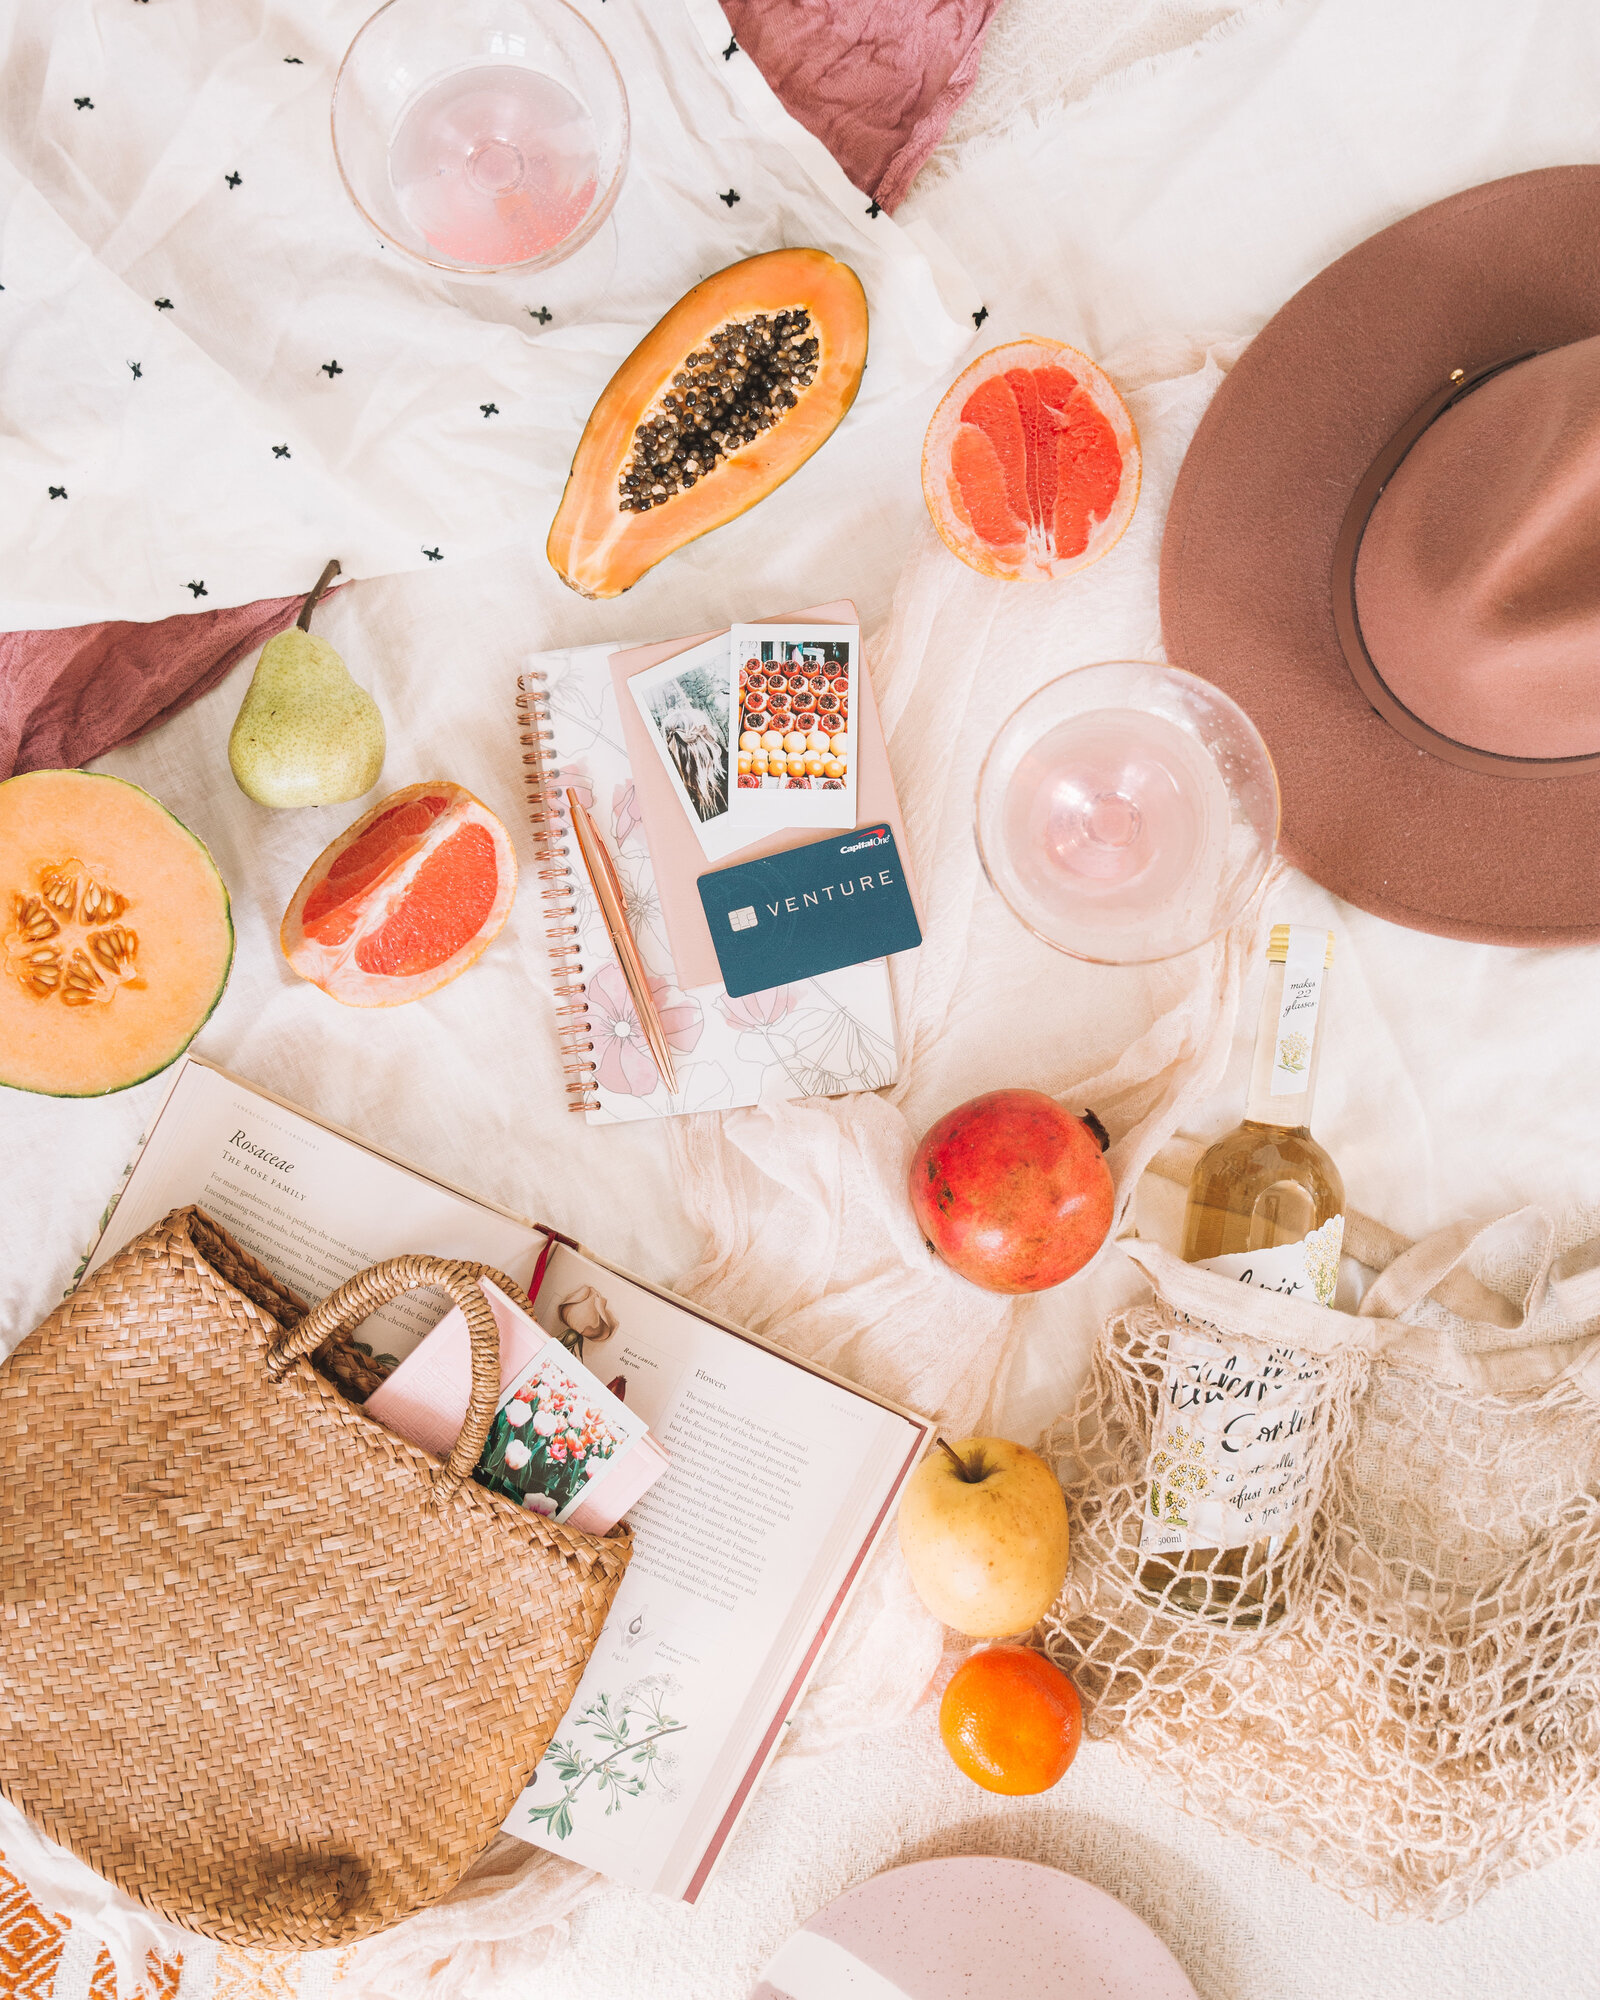 Capital One Venture Credit Card flat lay travel blogger The Blonde Abroad with hat papaya summer fruit styling by Chelsea Loren